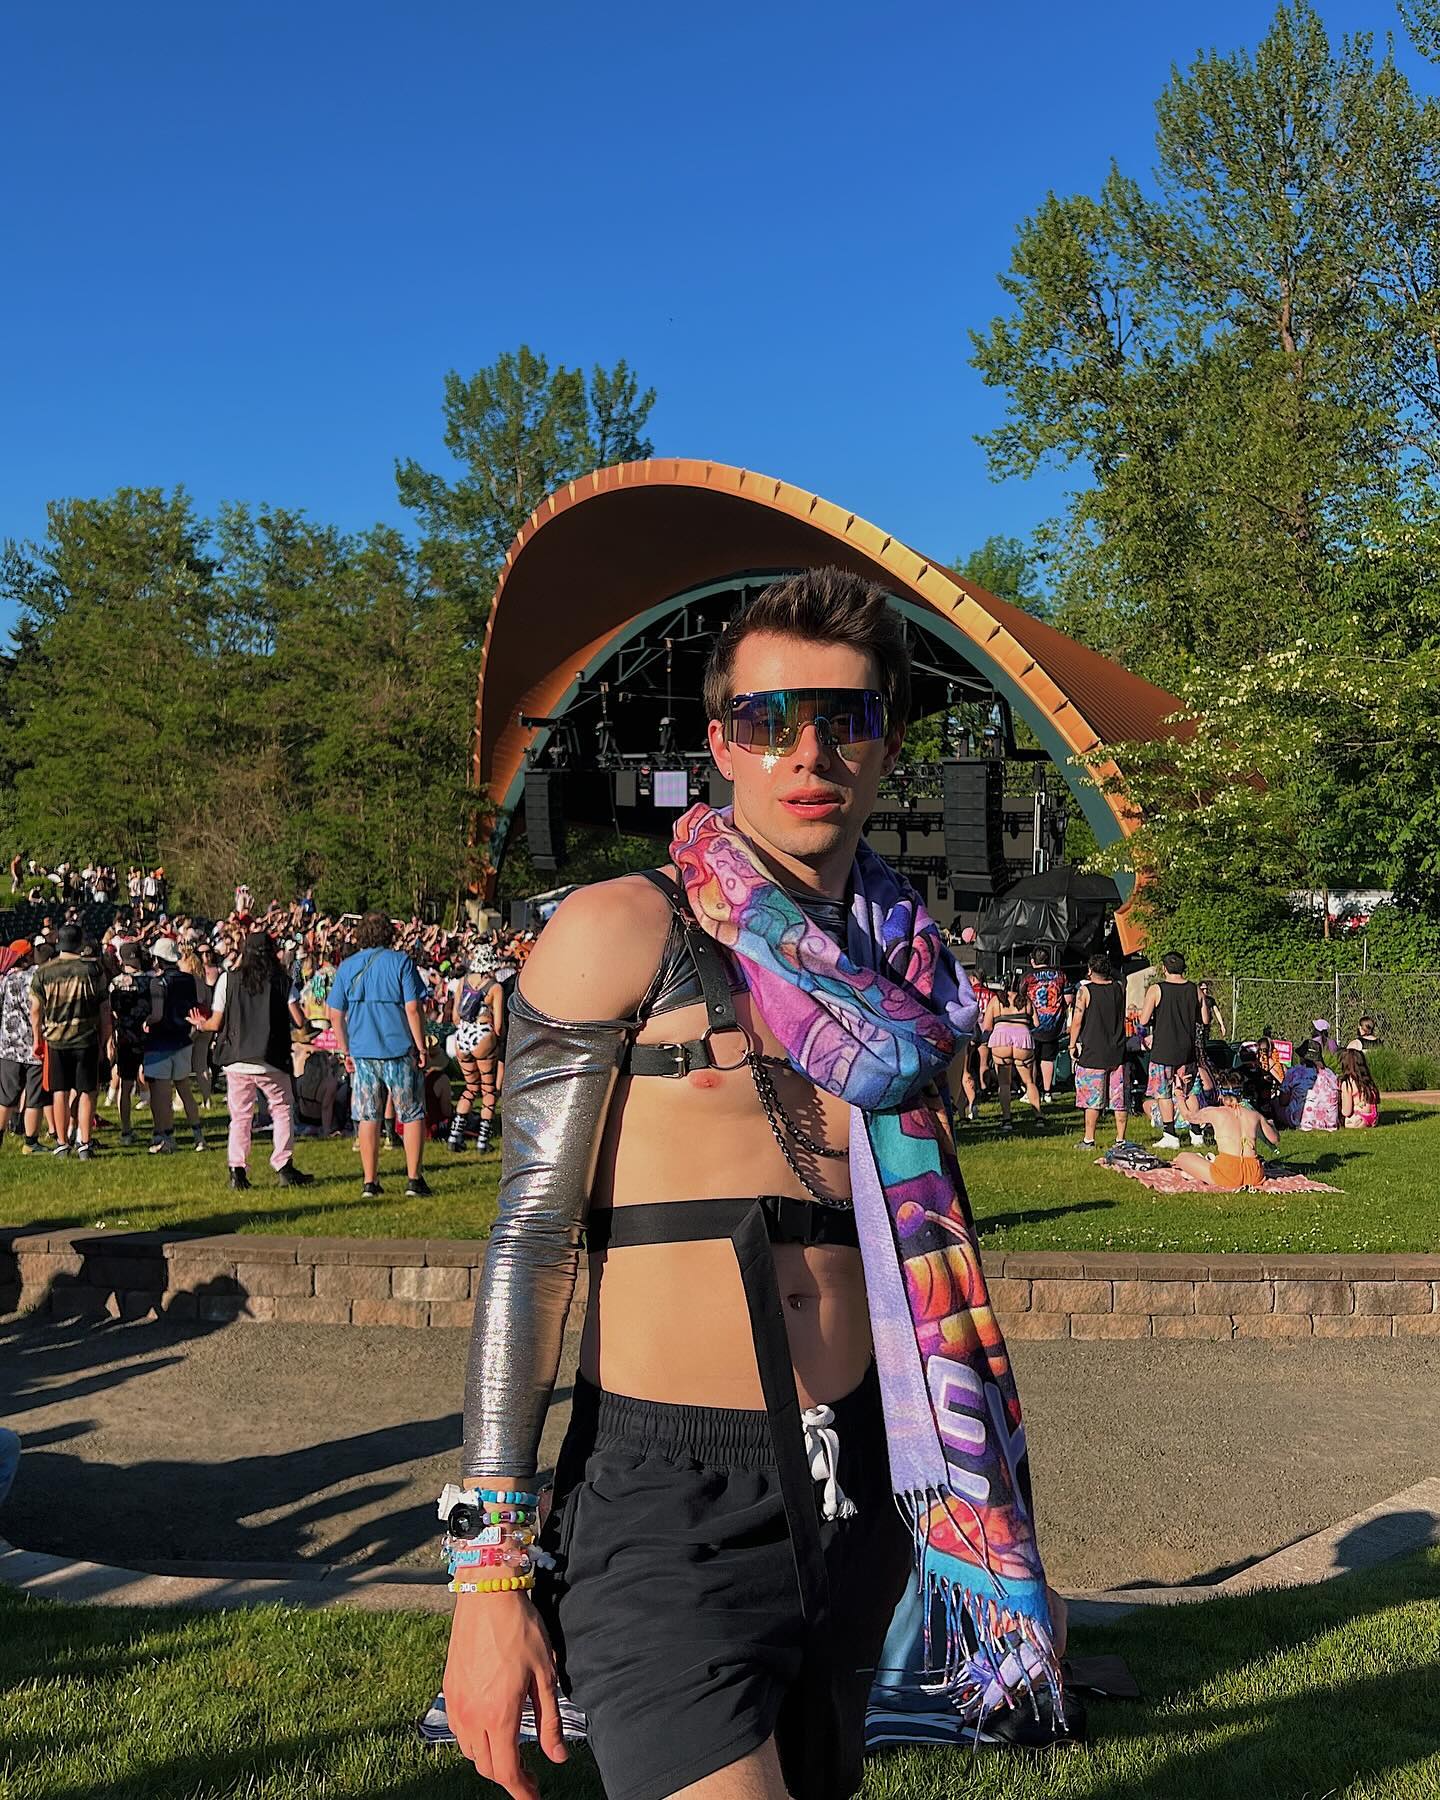 raver stand among crowd while wearing a rave outfit with chrome reflective arm sleeves and pashmina around neck exuding festival energy